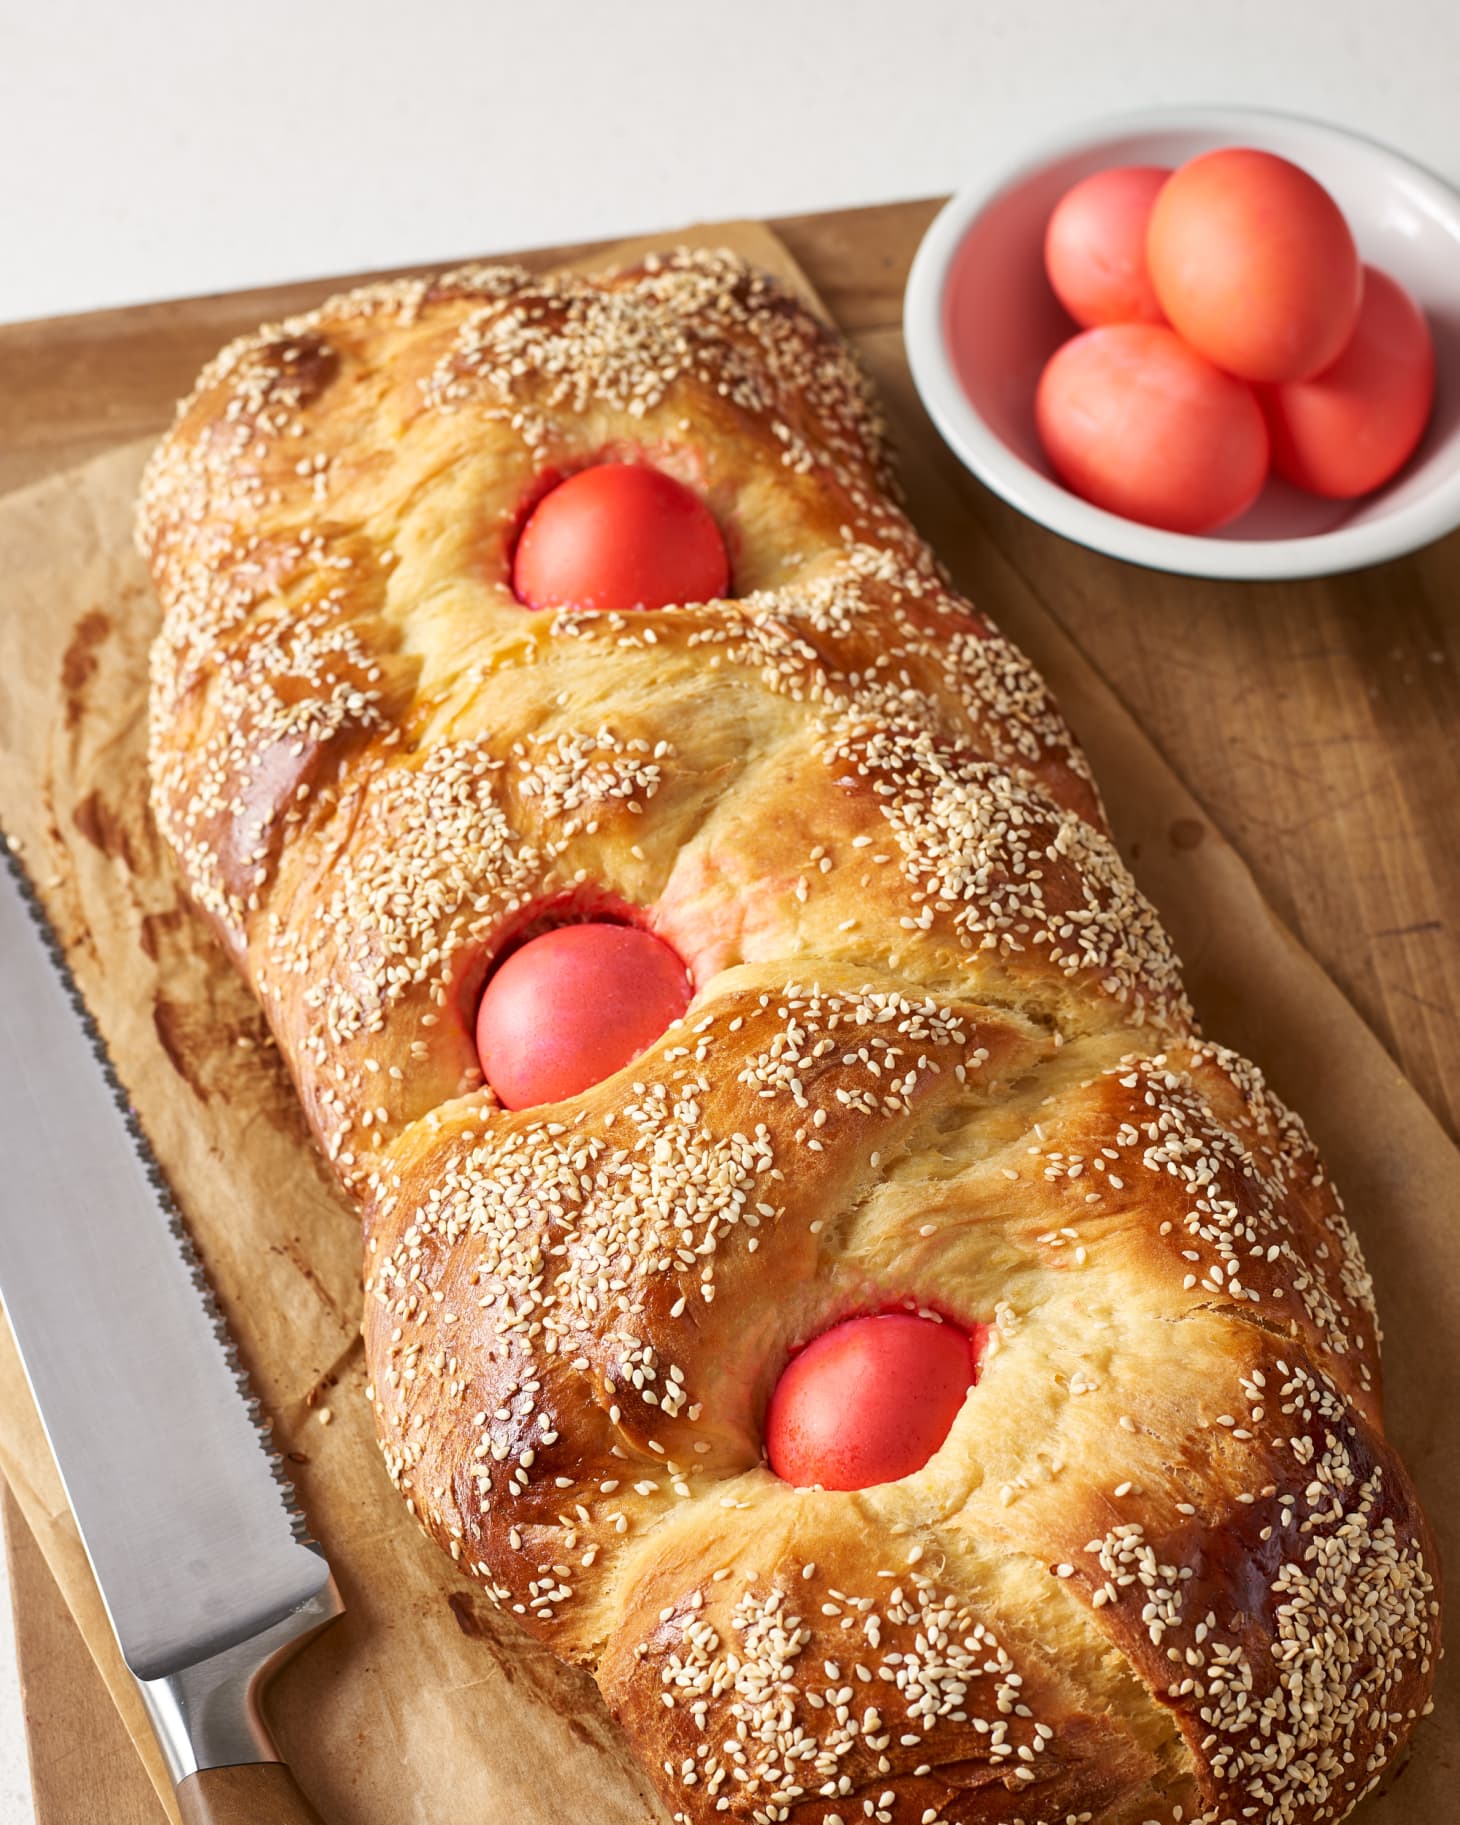 15 Best Greek Easter Bread Recipe – Easy Recipes To Make at Home